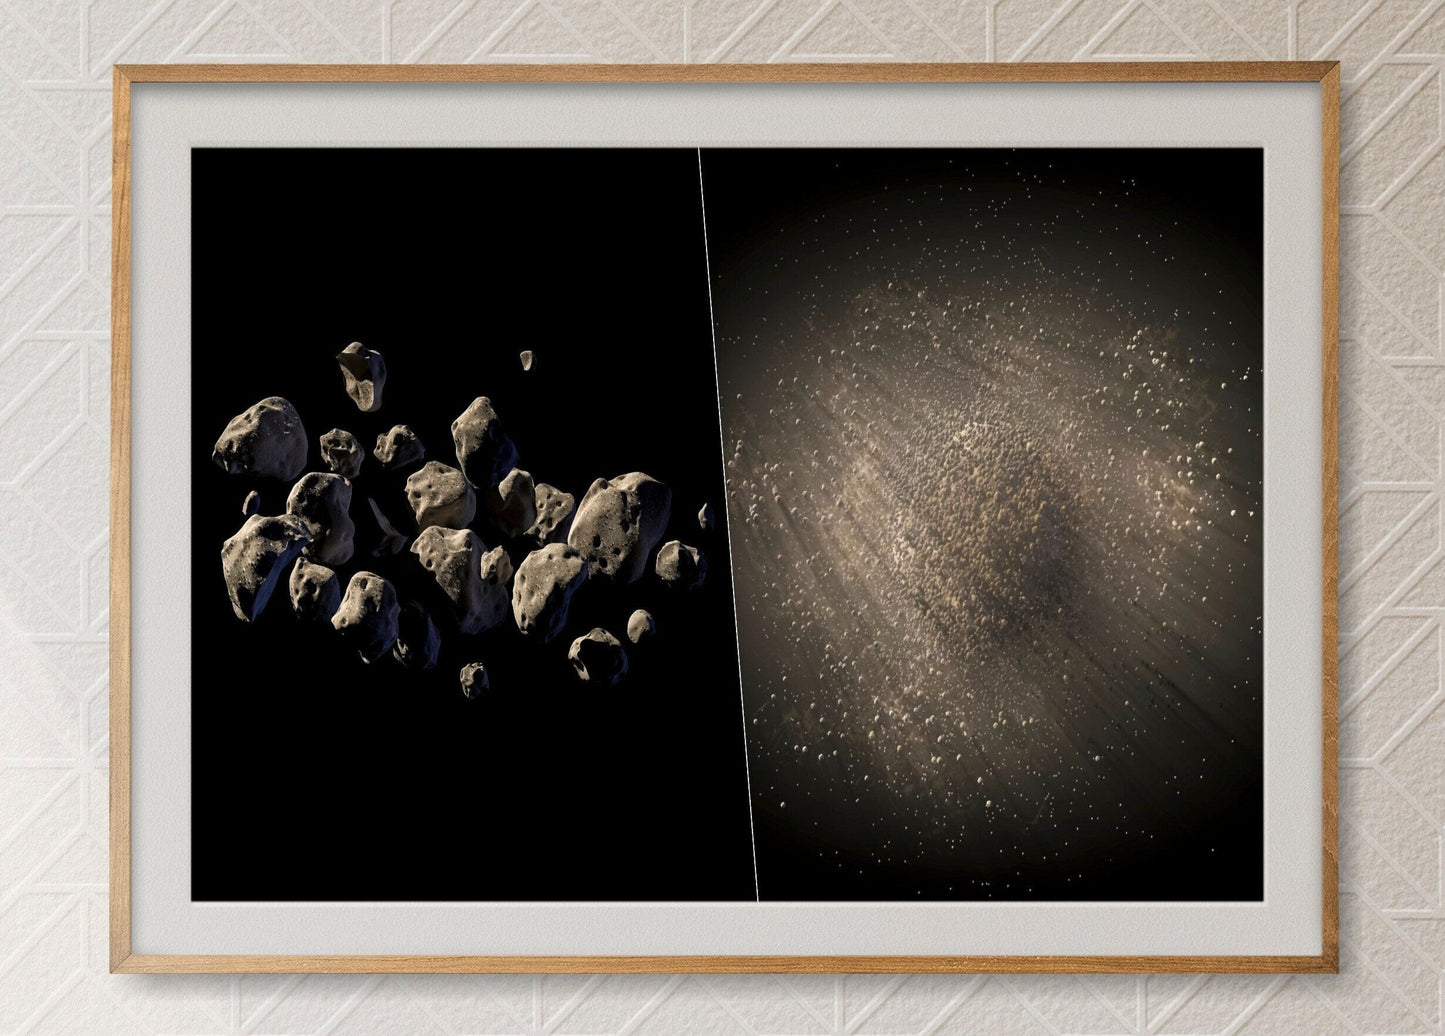 Asteroid Space Poster Print Wall Hanging Decor